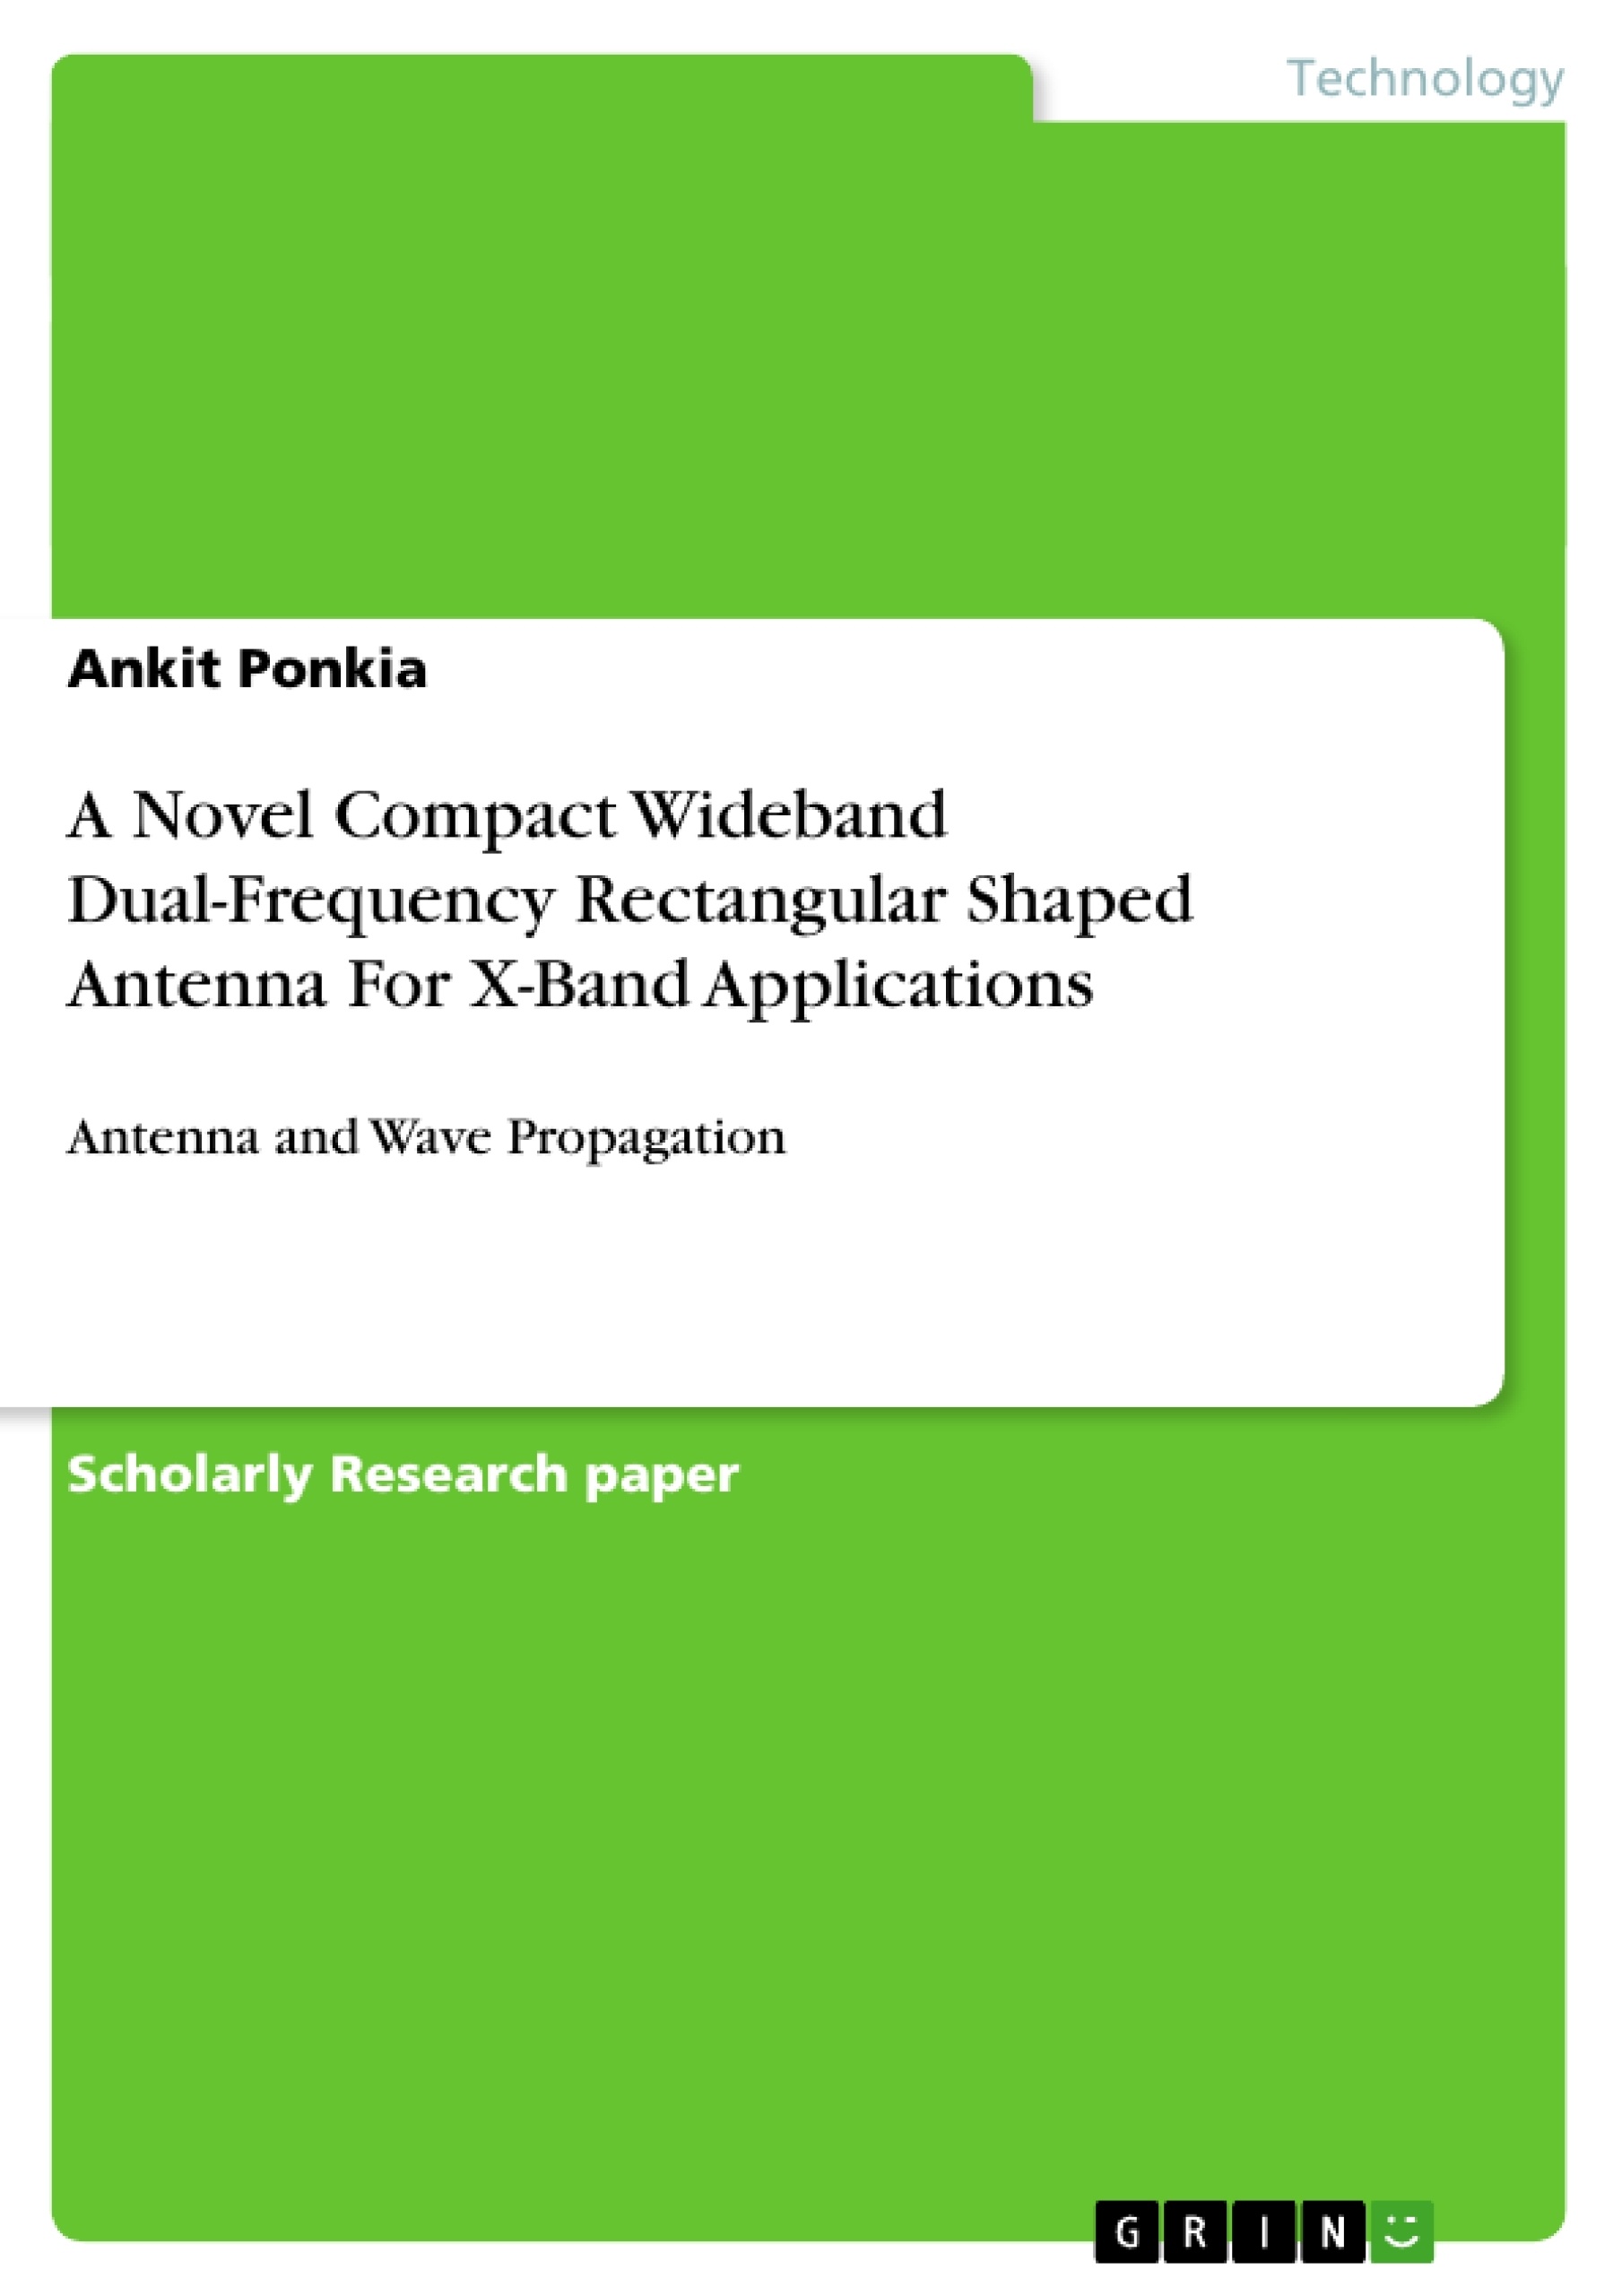 Title: A Novel Compact Wideband Dual-Frequency Rectangular Shaped Antenna For X-Band Applications